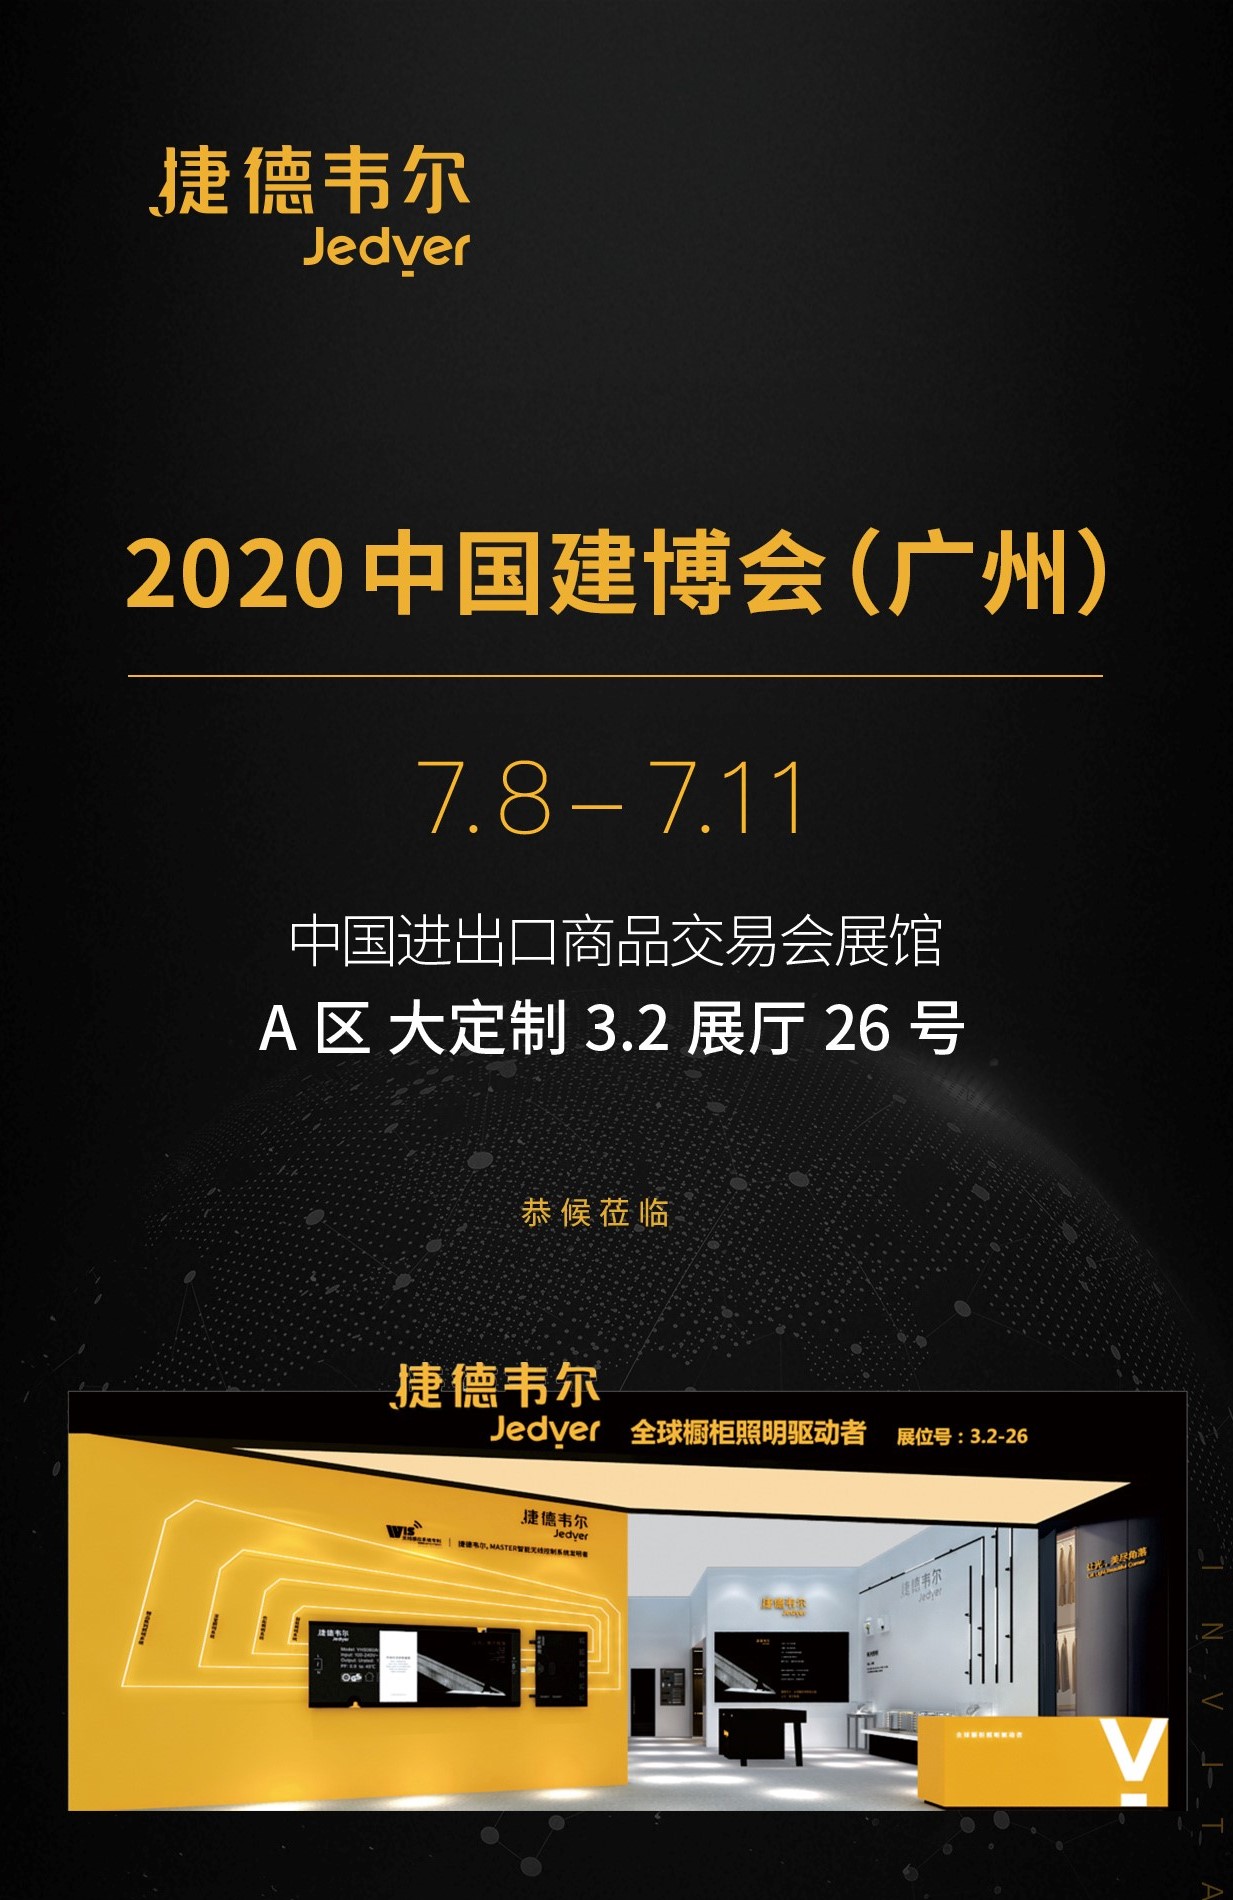 See it first!  What excitement will Jedver cabinet lighting bring to the 2020 Guangzhou Construction Expo?  (Picture 13)